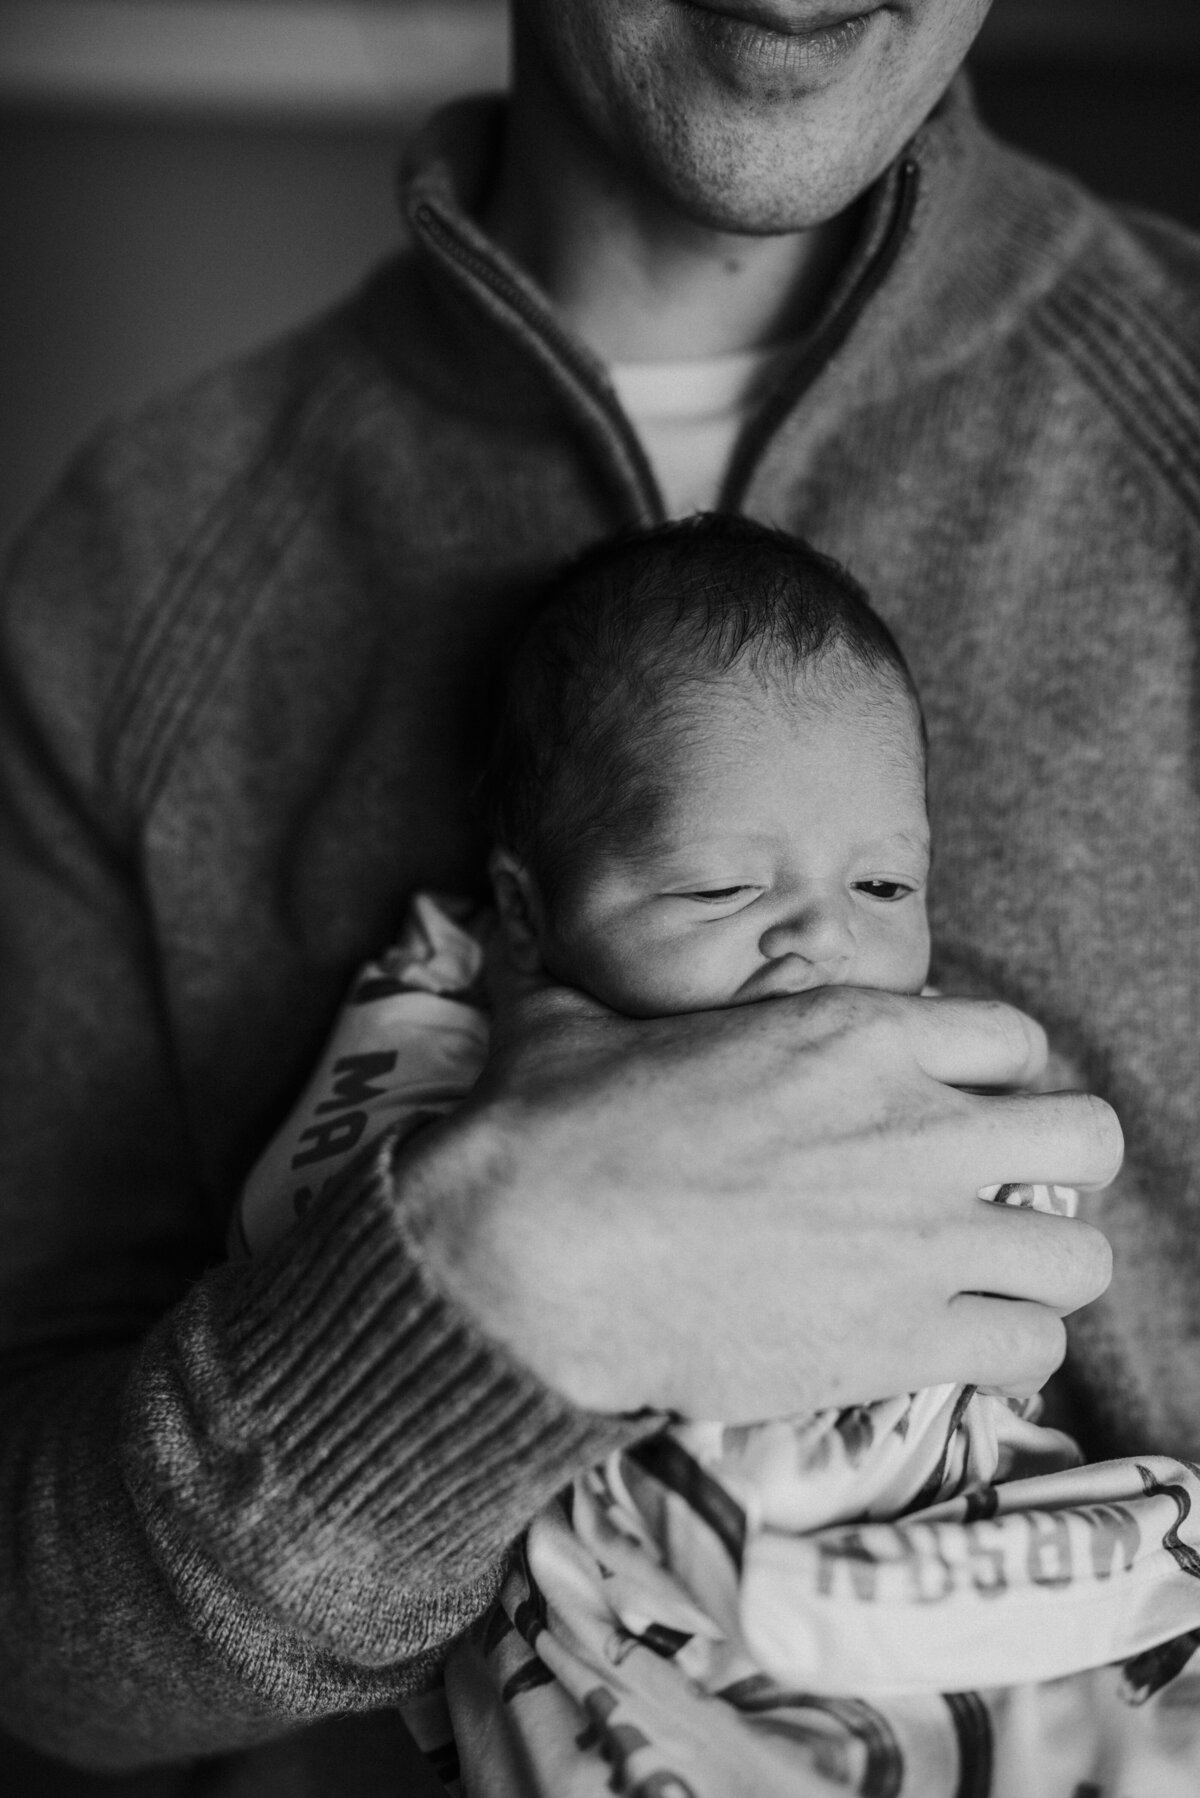 Feel the warm embrace of home with Minneapolis newborn portraits. Shannon Kathleen Photography captures the comforting atmosphere as your baby begins their journey surrounded by love